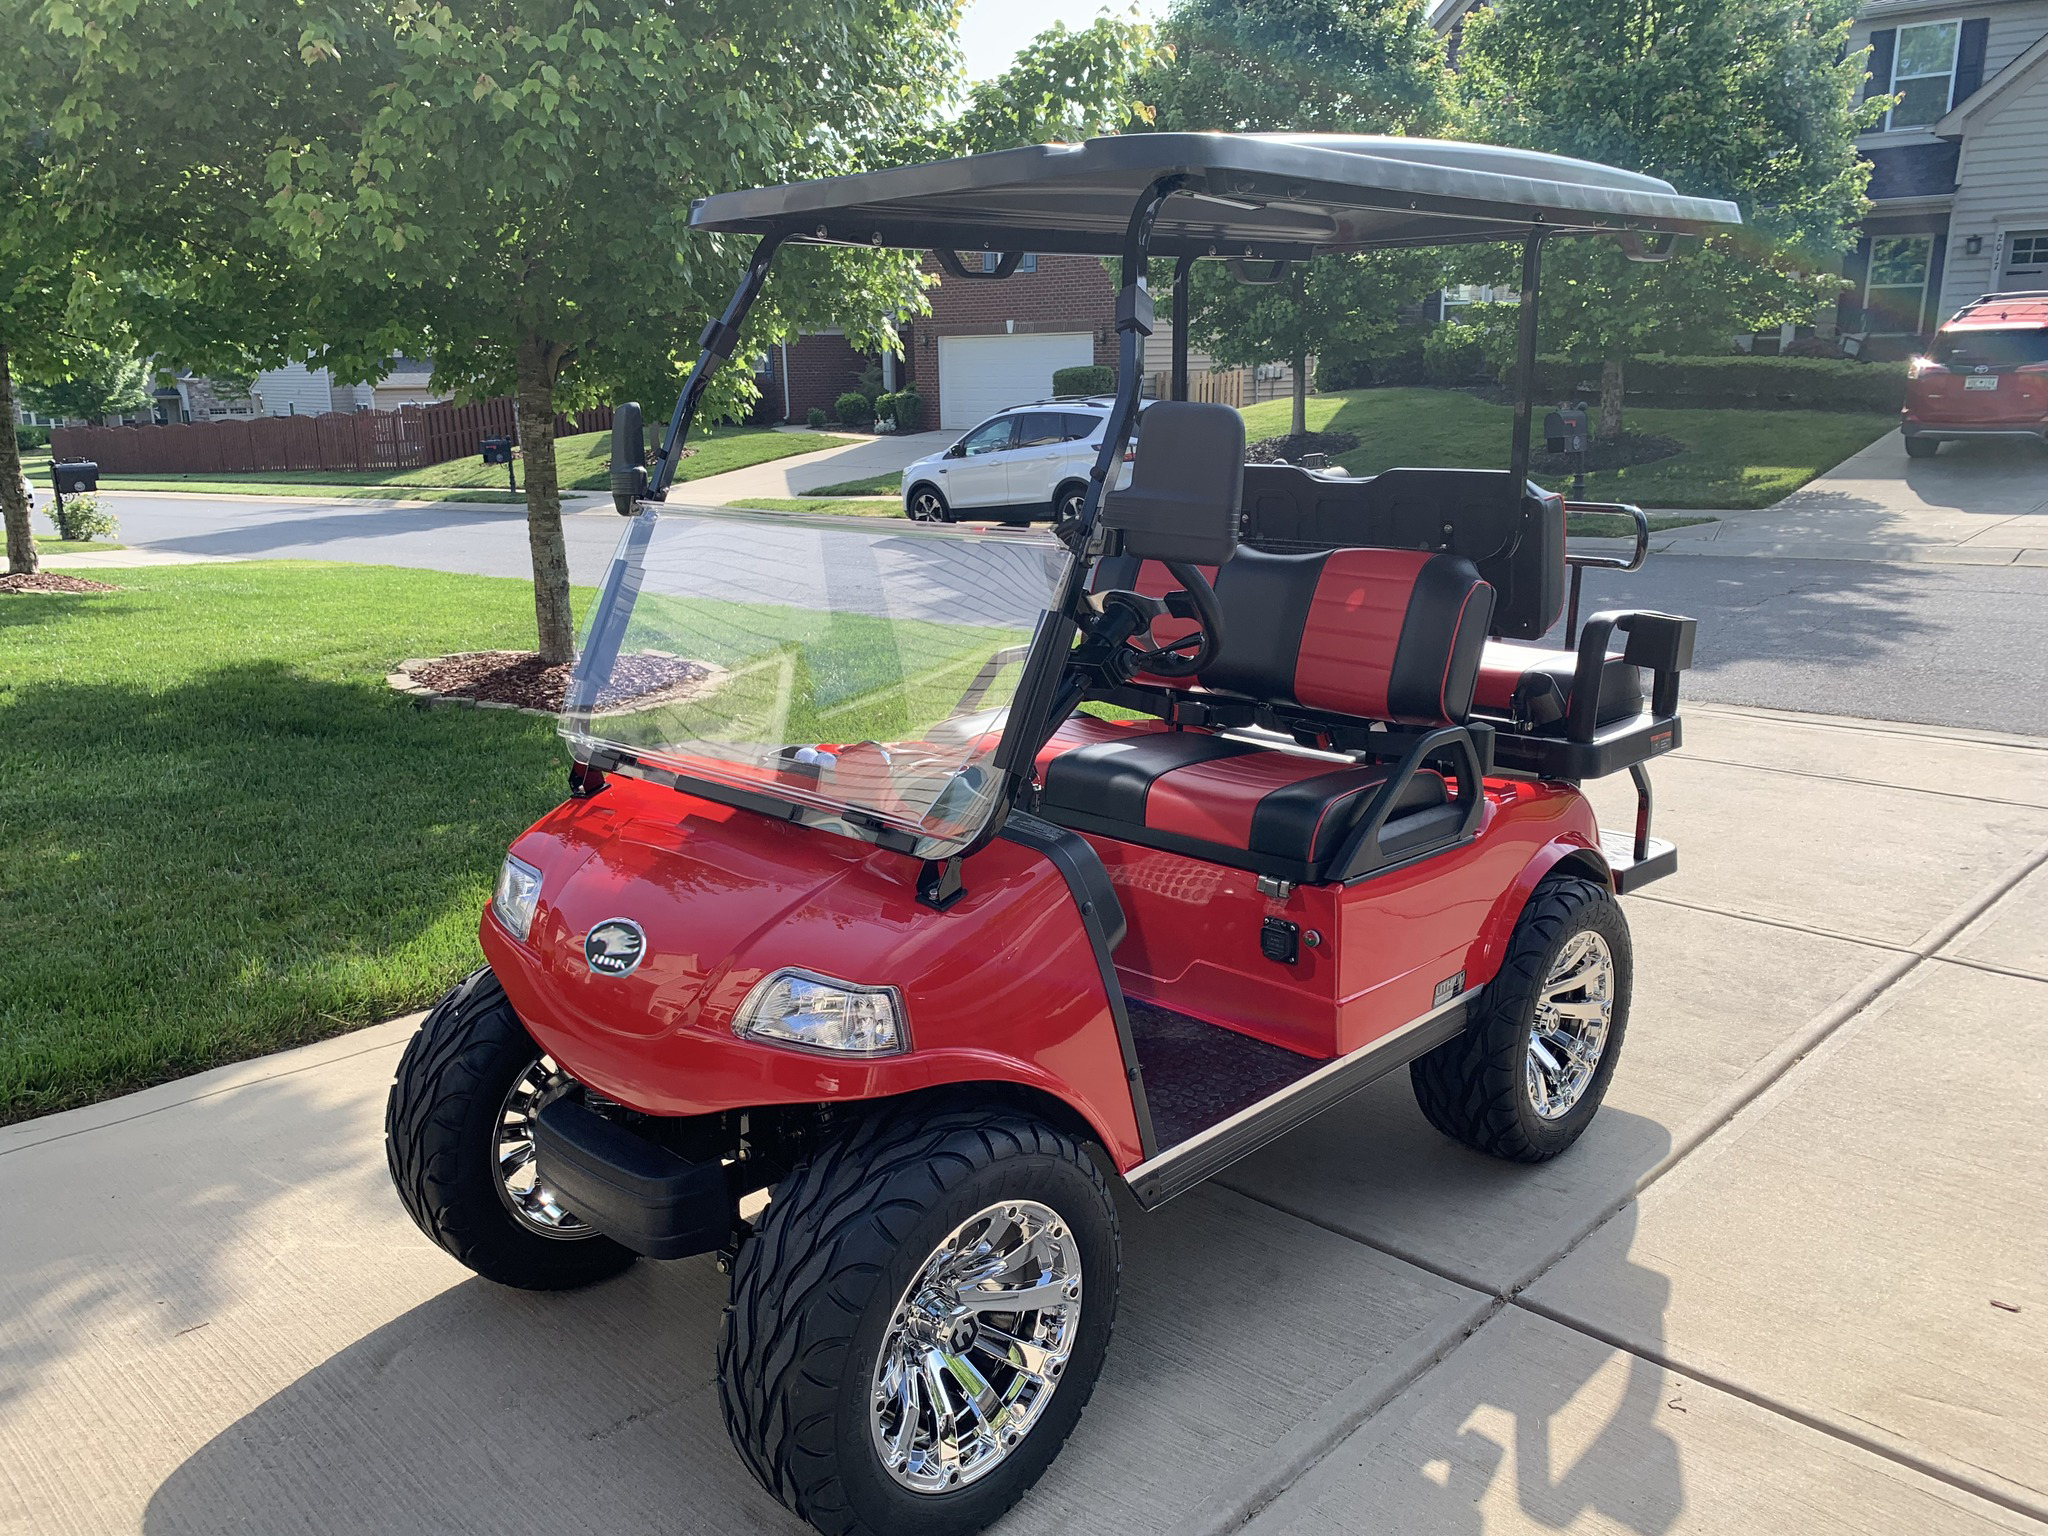 https://www.hddexpress.com/a-golf-cart-with-increased-comfort-and-more-performance-product/